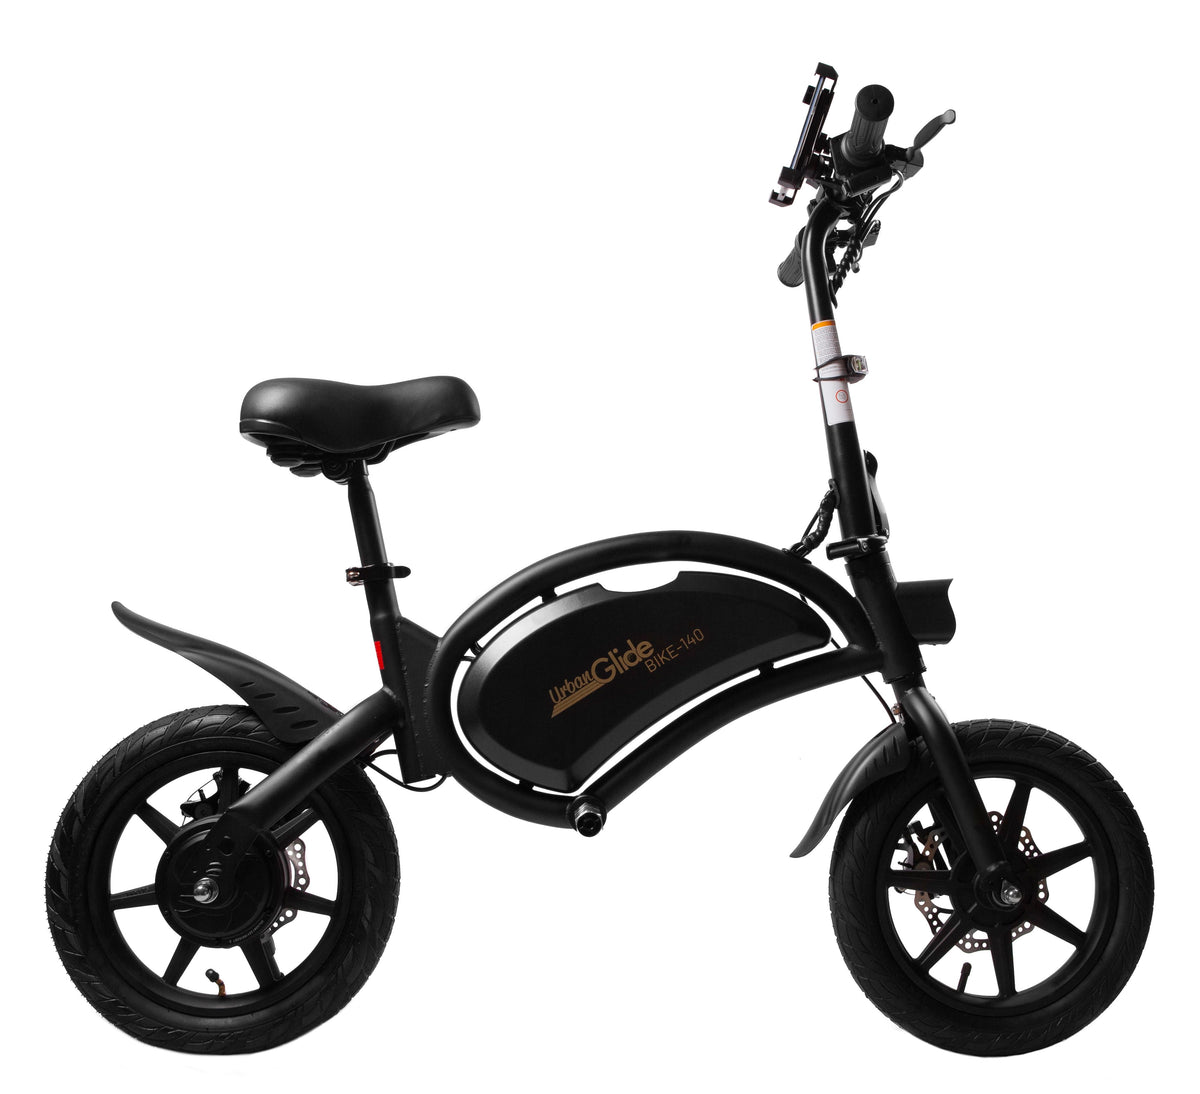 URBANGLIDE Electric Bicycle without pedals 140 6AH Black - 56792